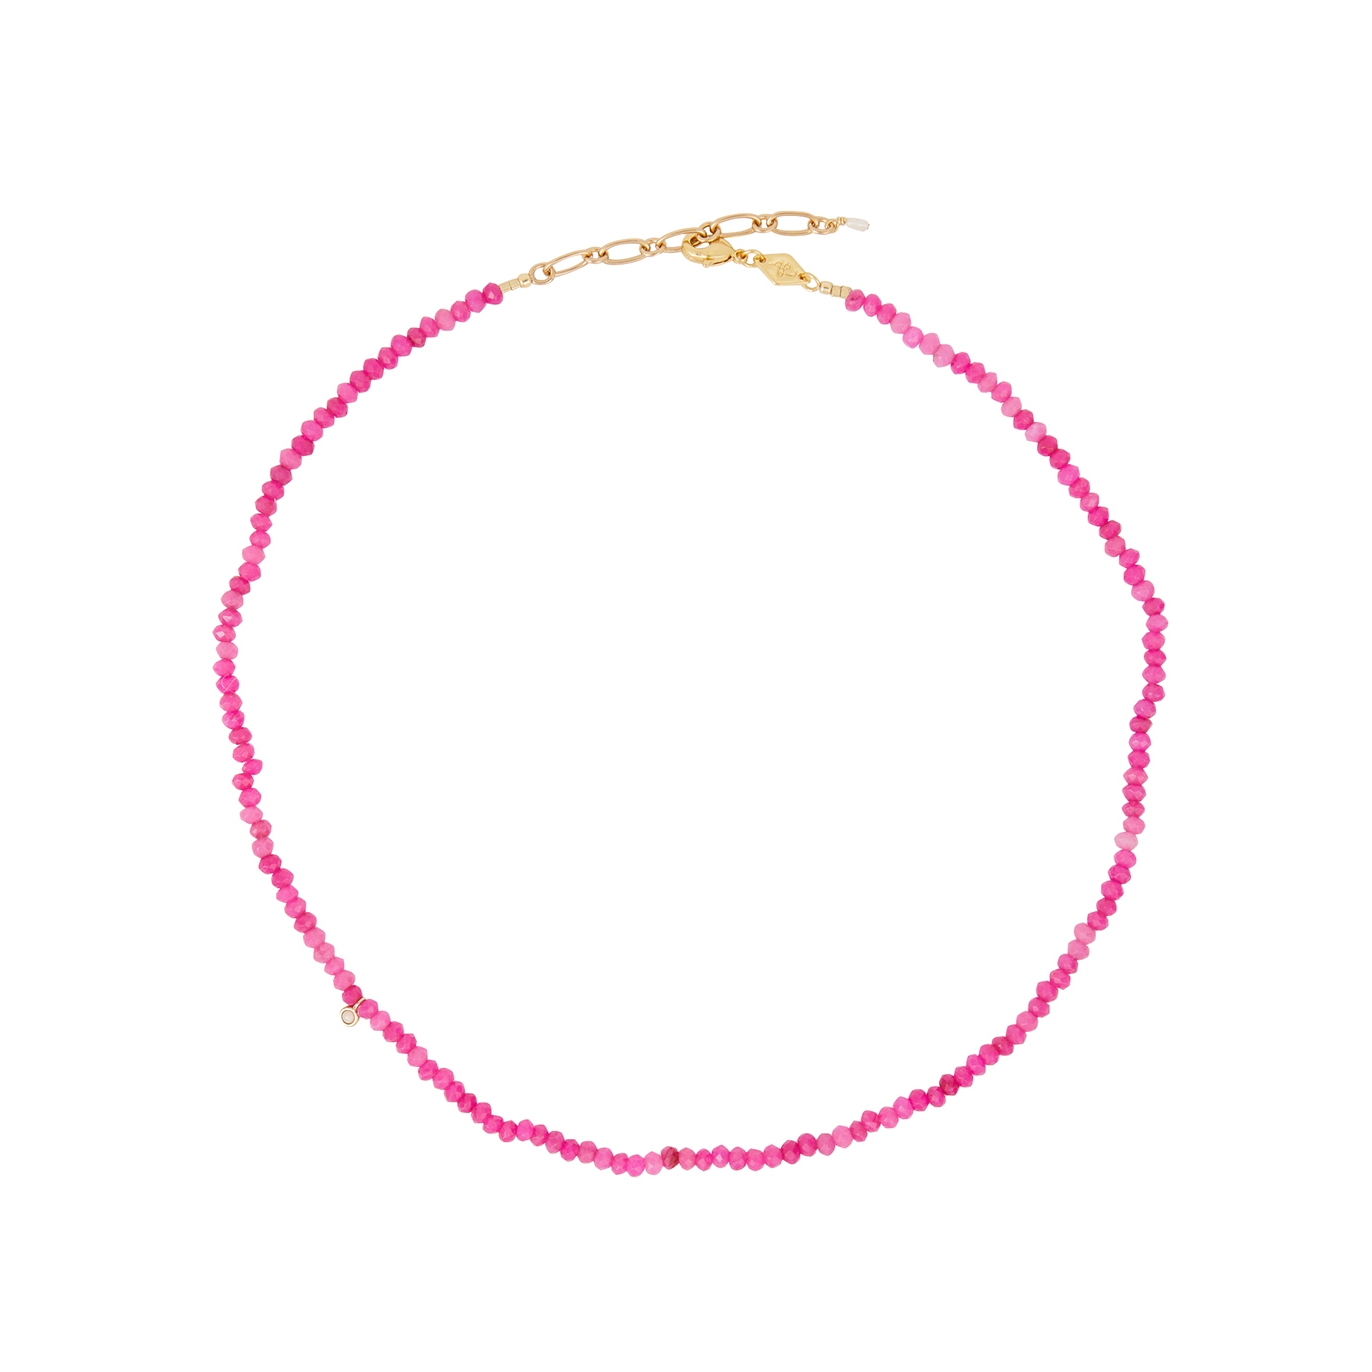 Anni LU Pump Up The Jam Beaded Necklace - Pink - One Size